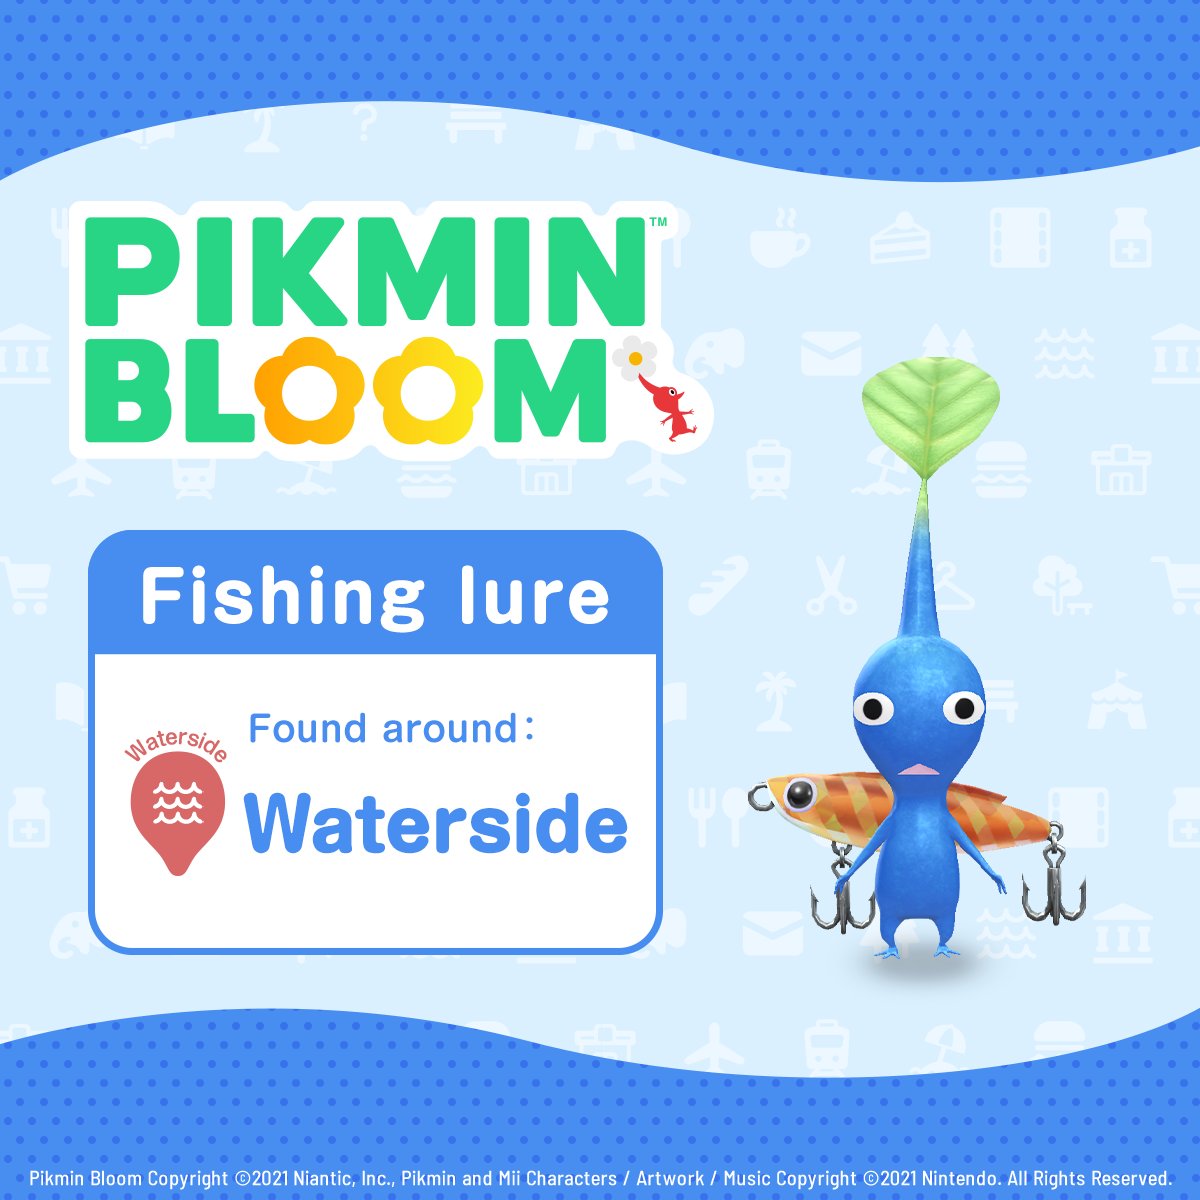 Pikmin Bloom on X: ✨#Pikmin Guide✨ 🎣Fishing Lure🎣 🍃 Found around:  Waterside If you're relaxing near the water, keep your eyes peeled for  “Fishing Lure” Decor Pikmin 🌱 This Decor #Pikmin is